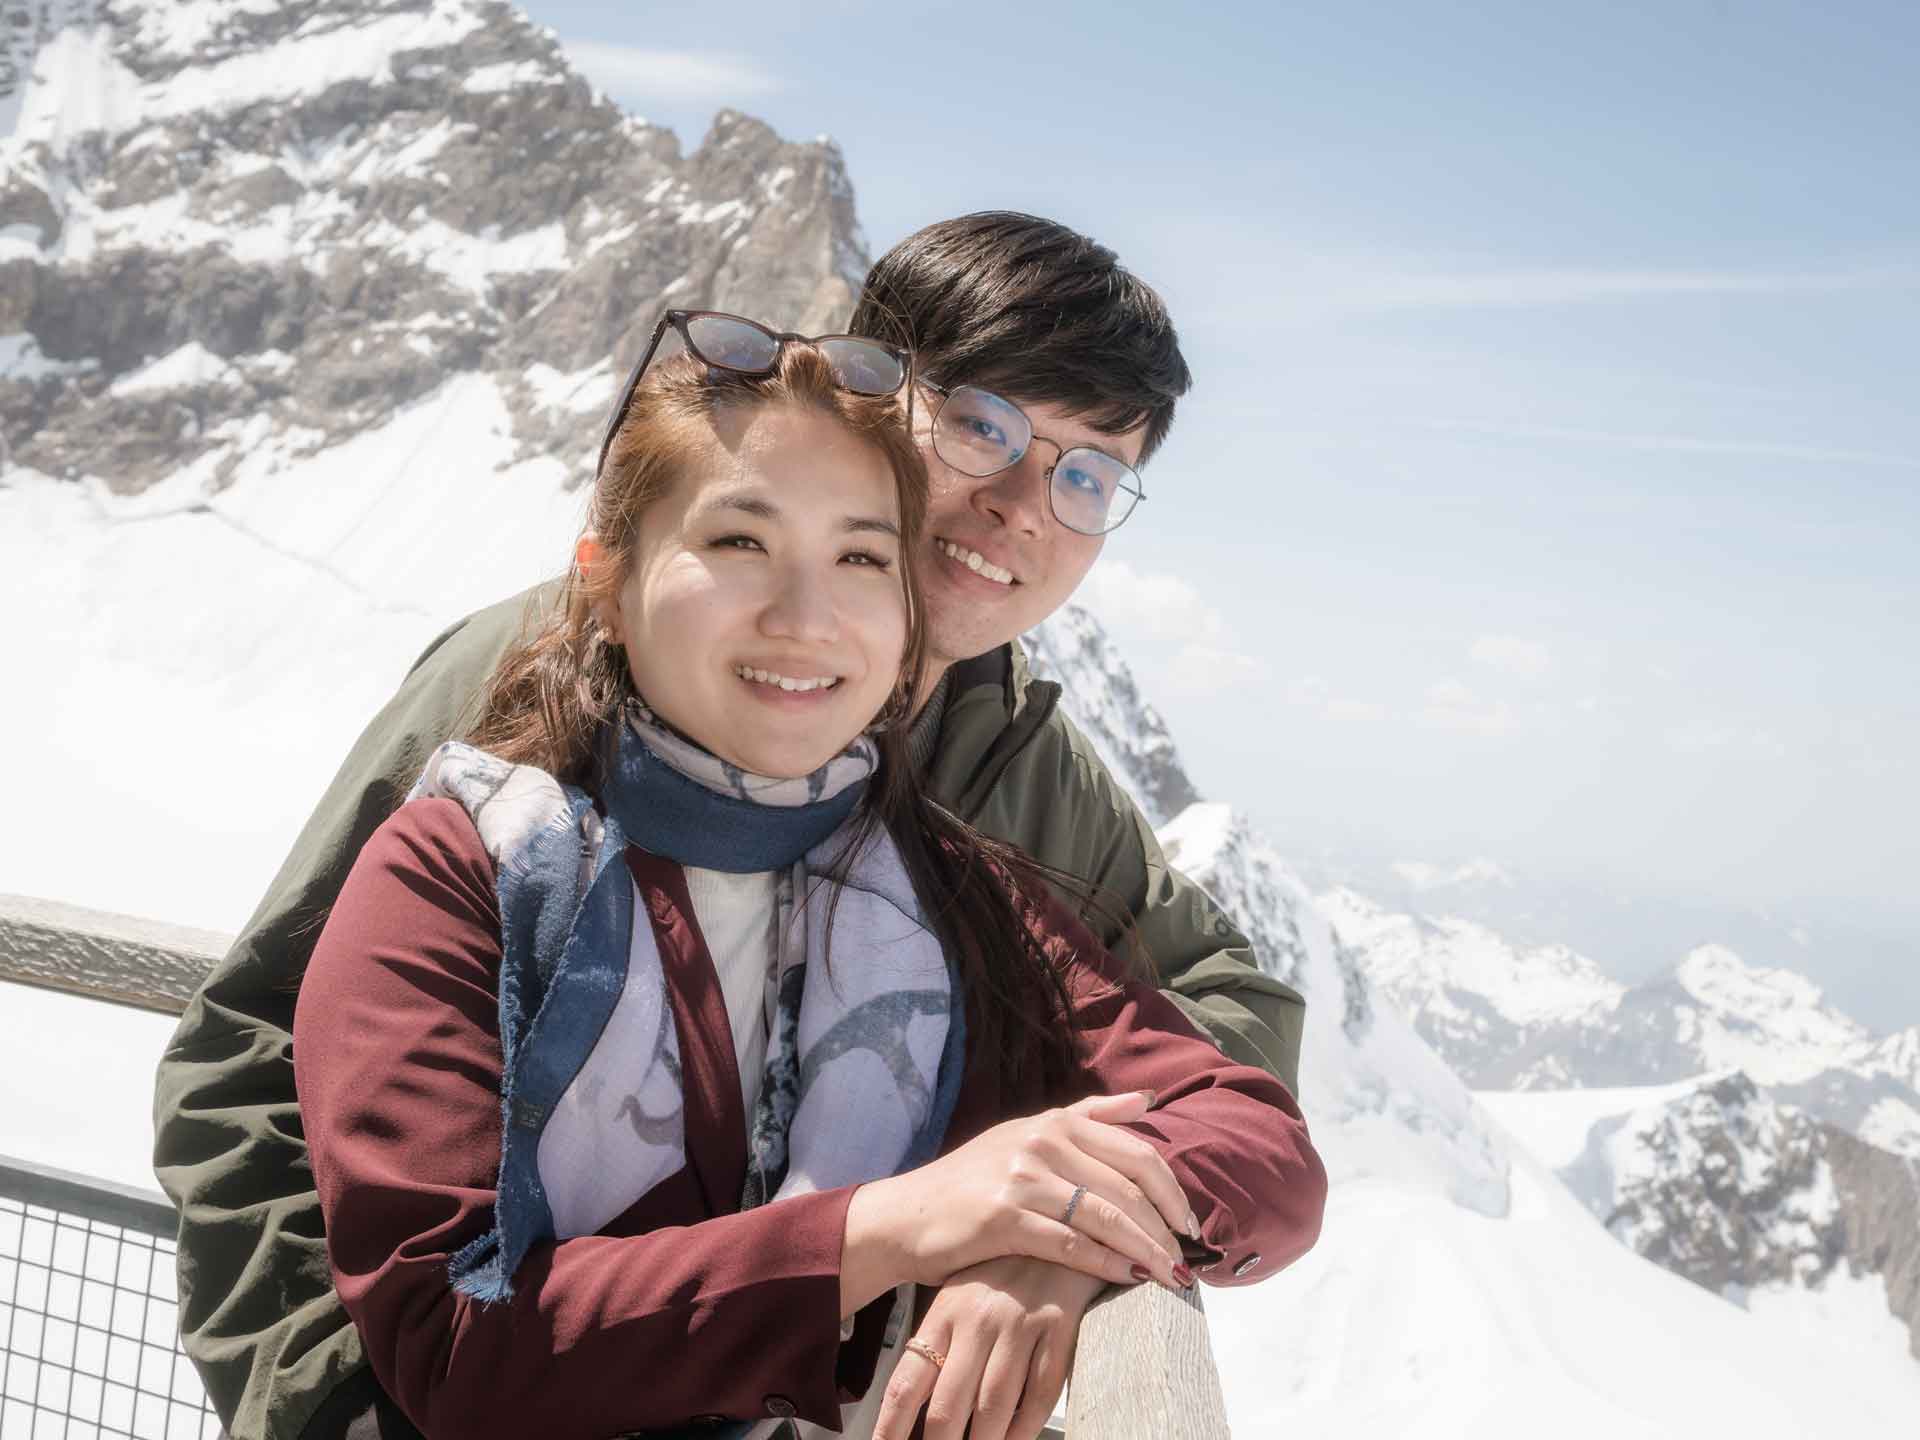 Surprise Engagement on the Jungfraujoch